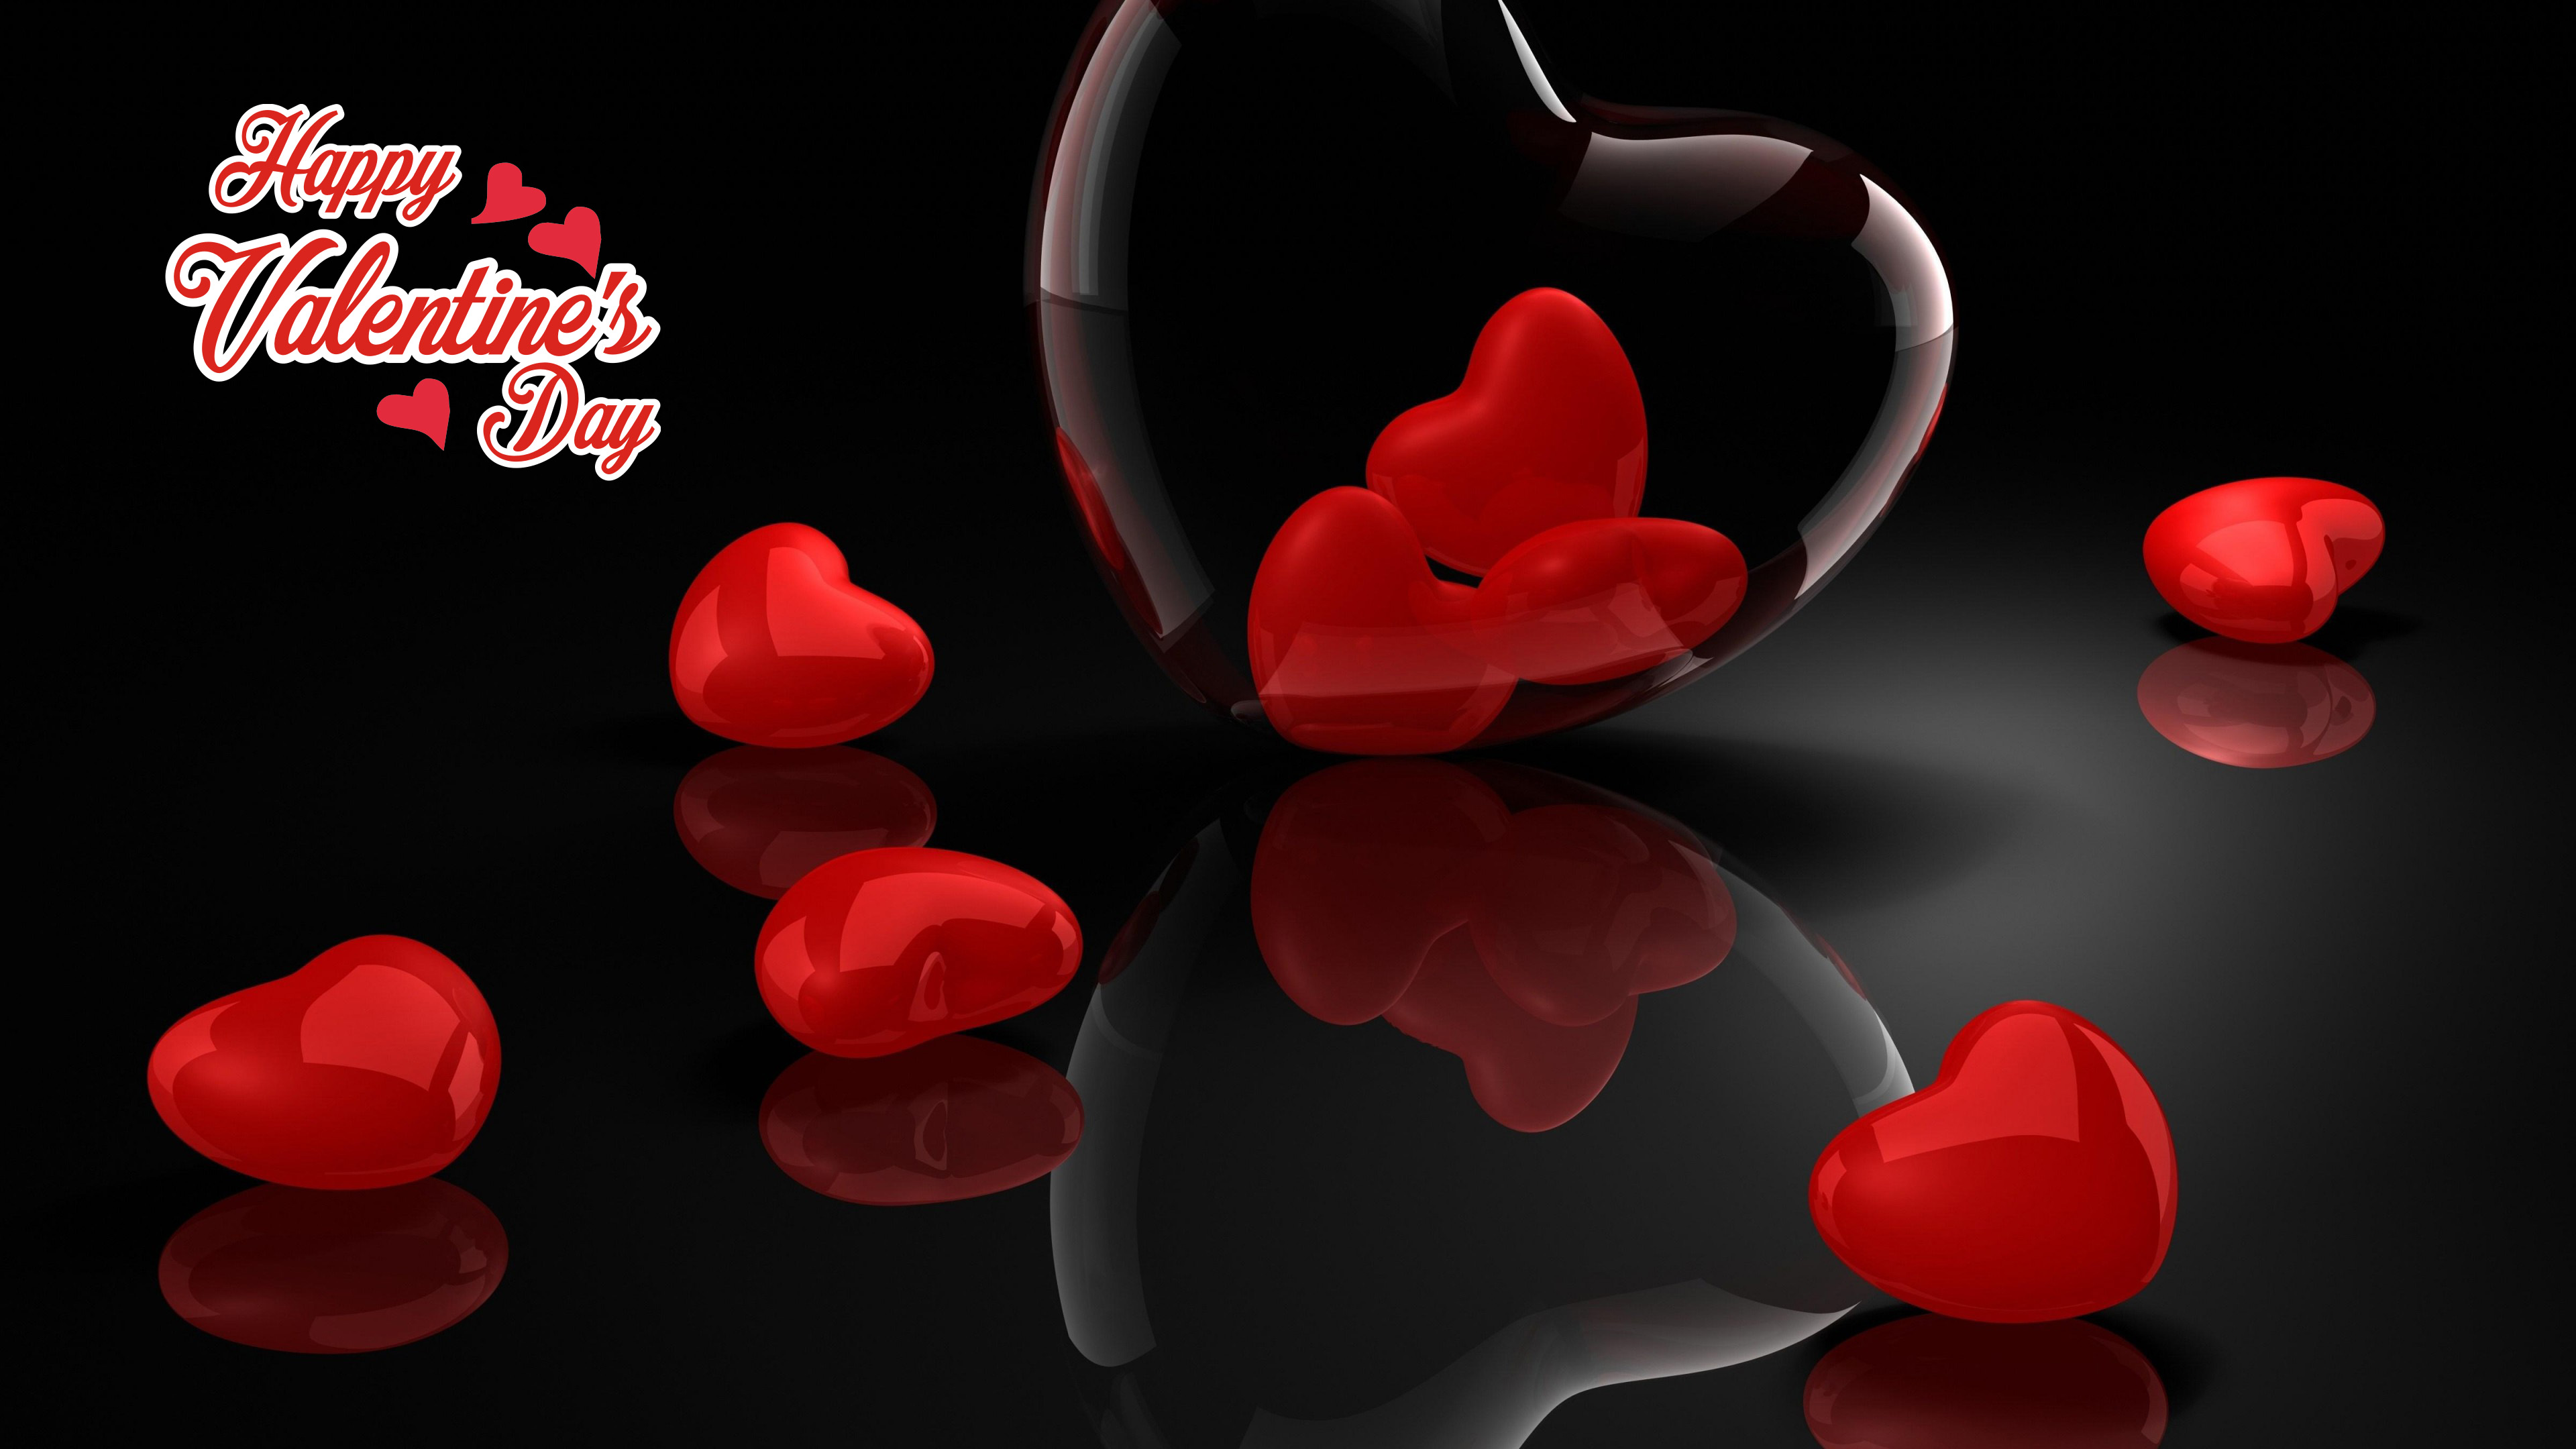 Valentines Day Hd Backgrounds - HD Wallpaper 